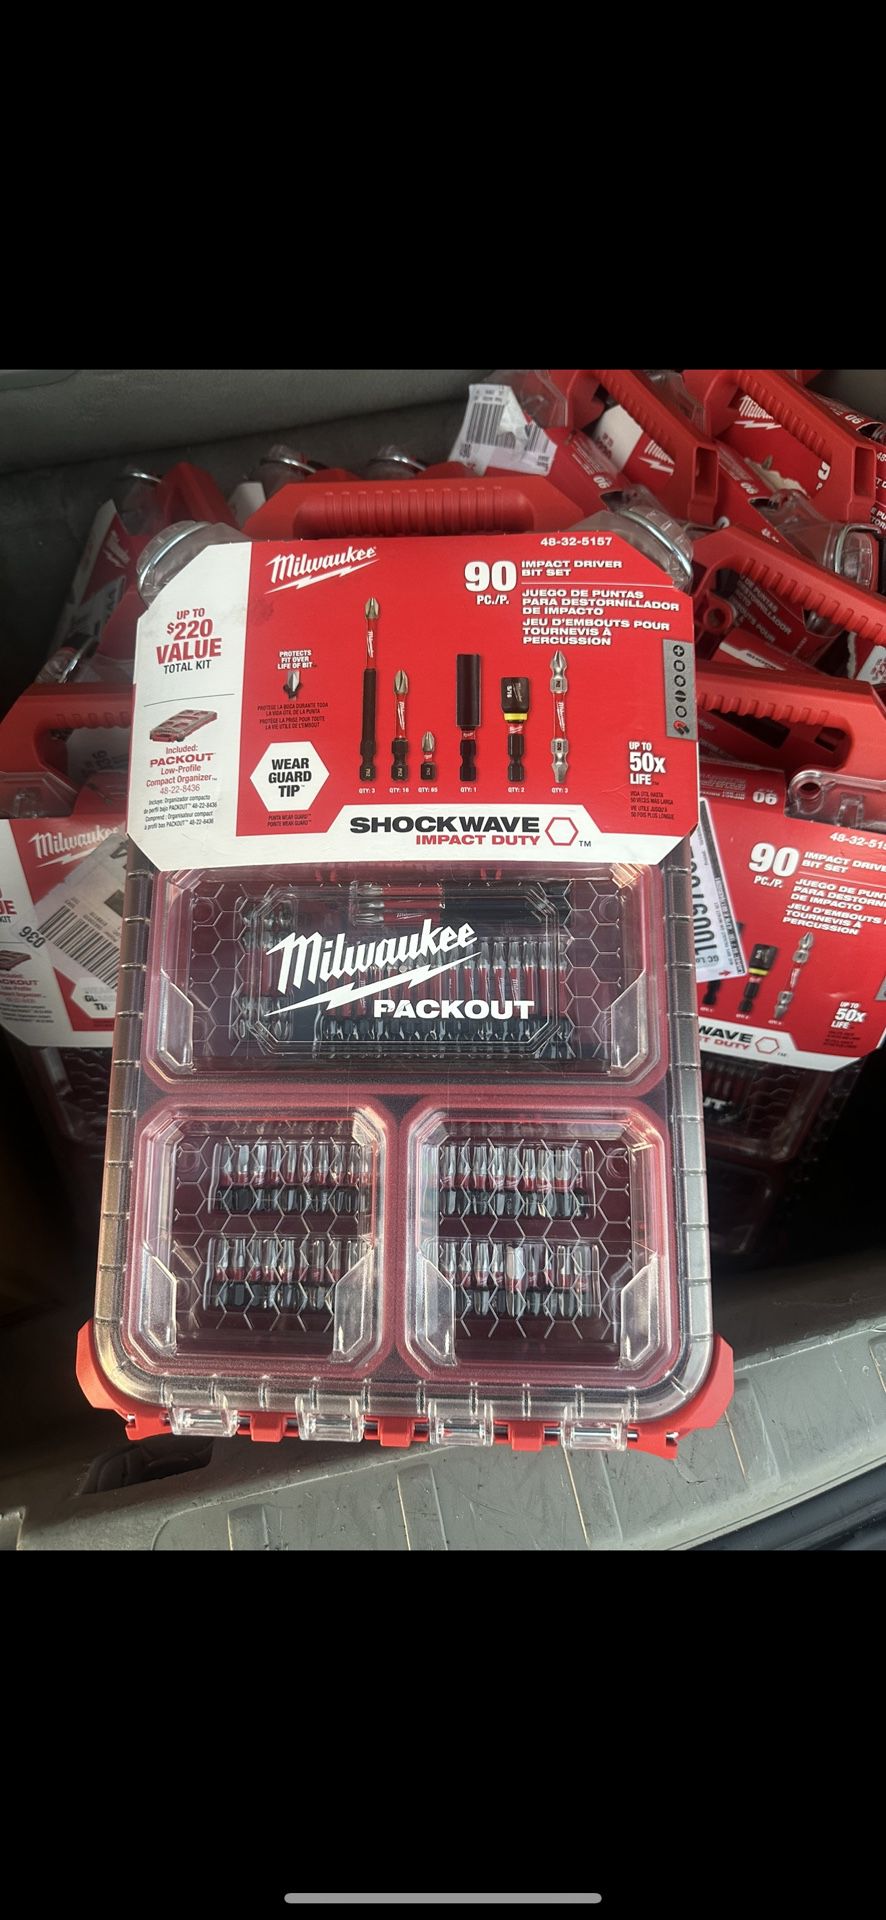 Milwaukee  SHOCKWAVE Impact Duty Alloy Steel Driver Bit Set with PACKOUT Case (90-Piece) FIRM  Price $75 only 3 Left  No Offers 